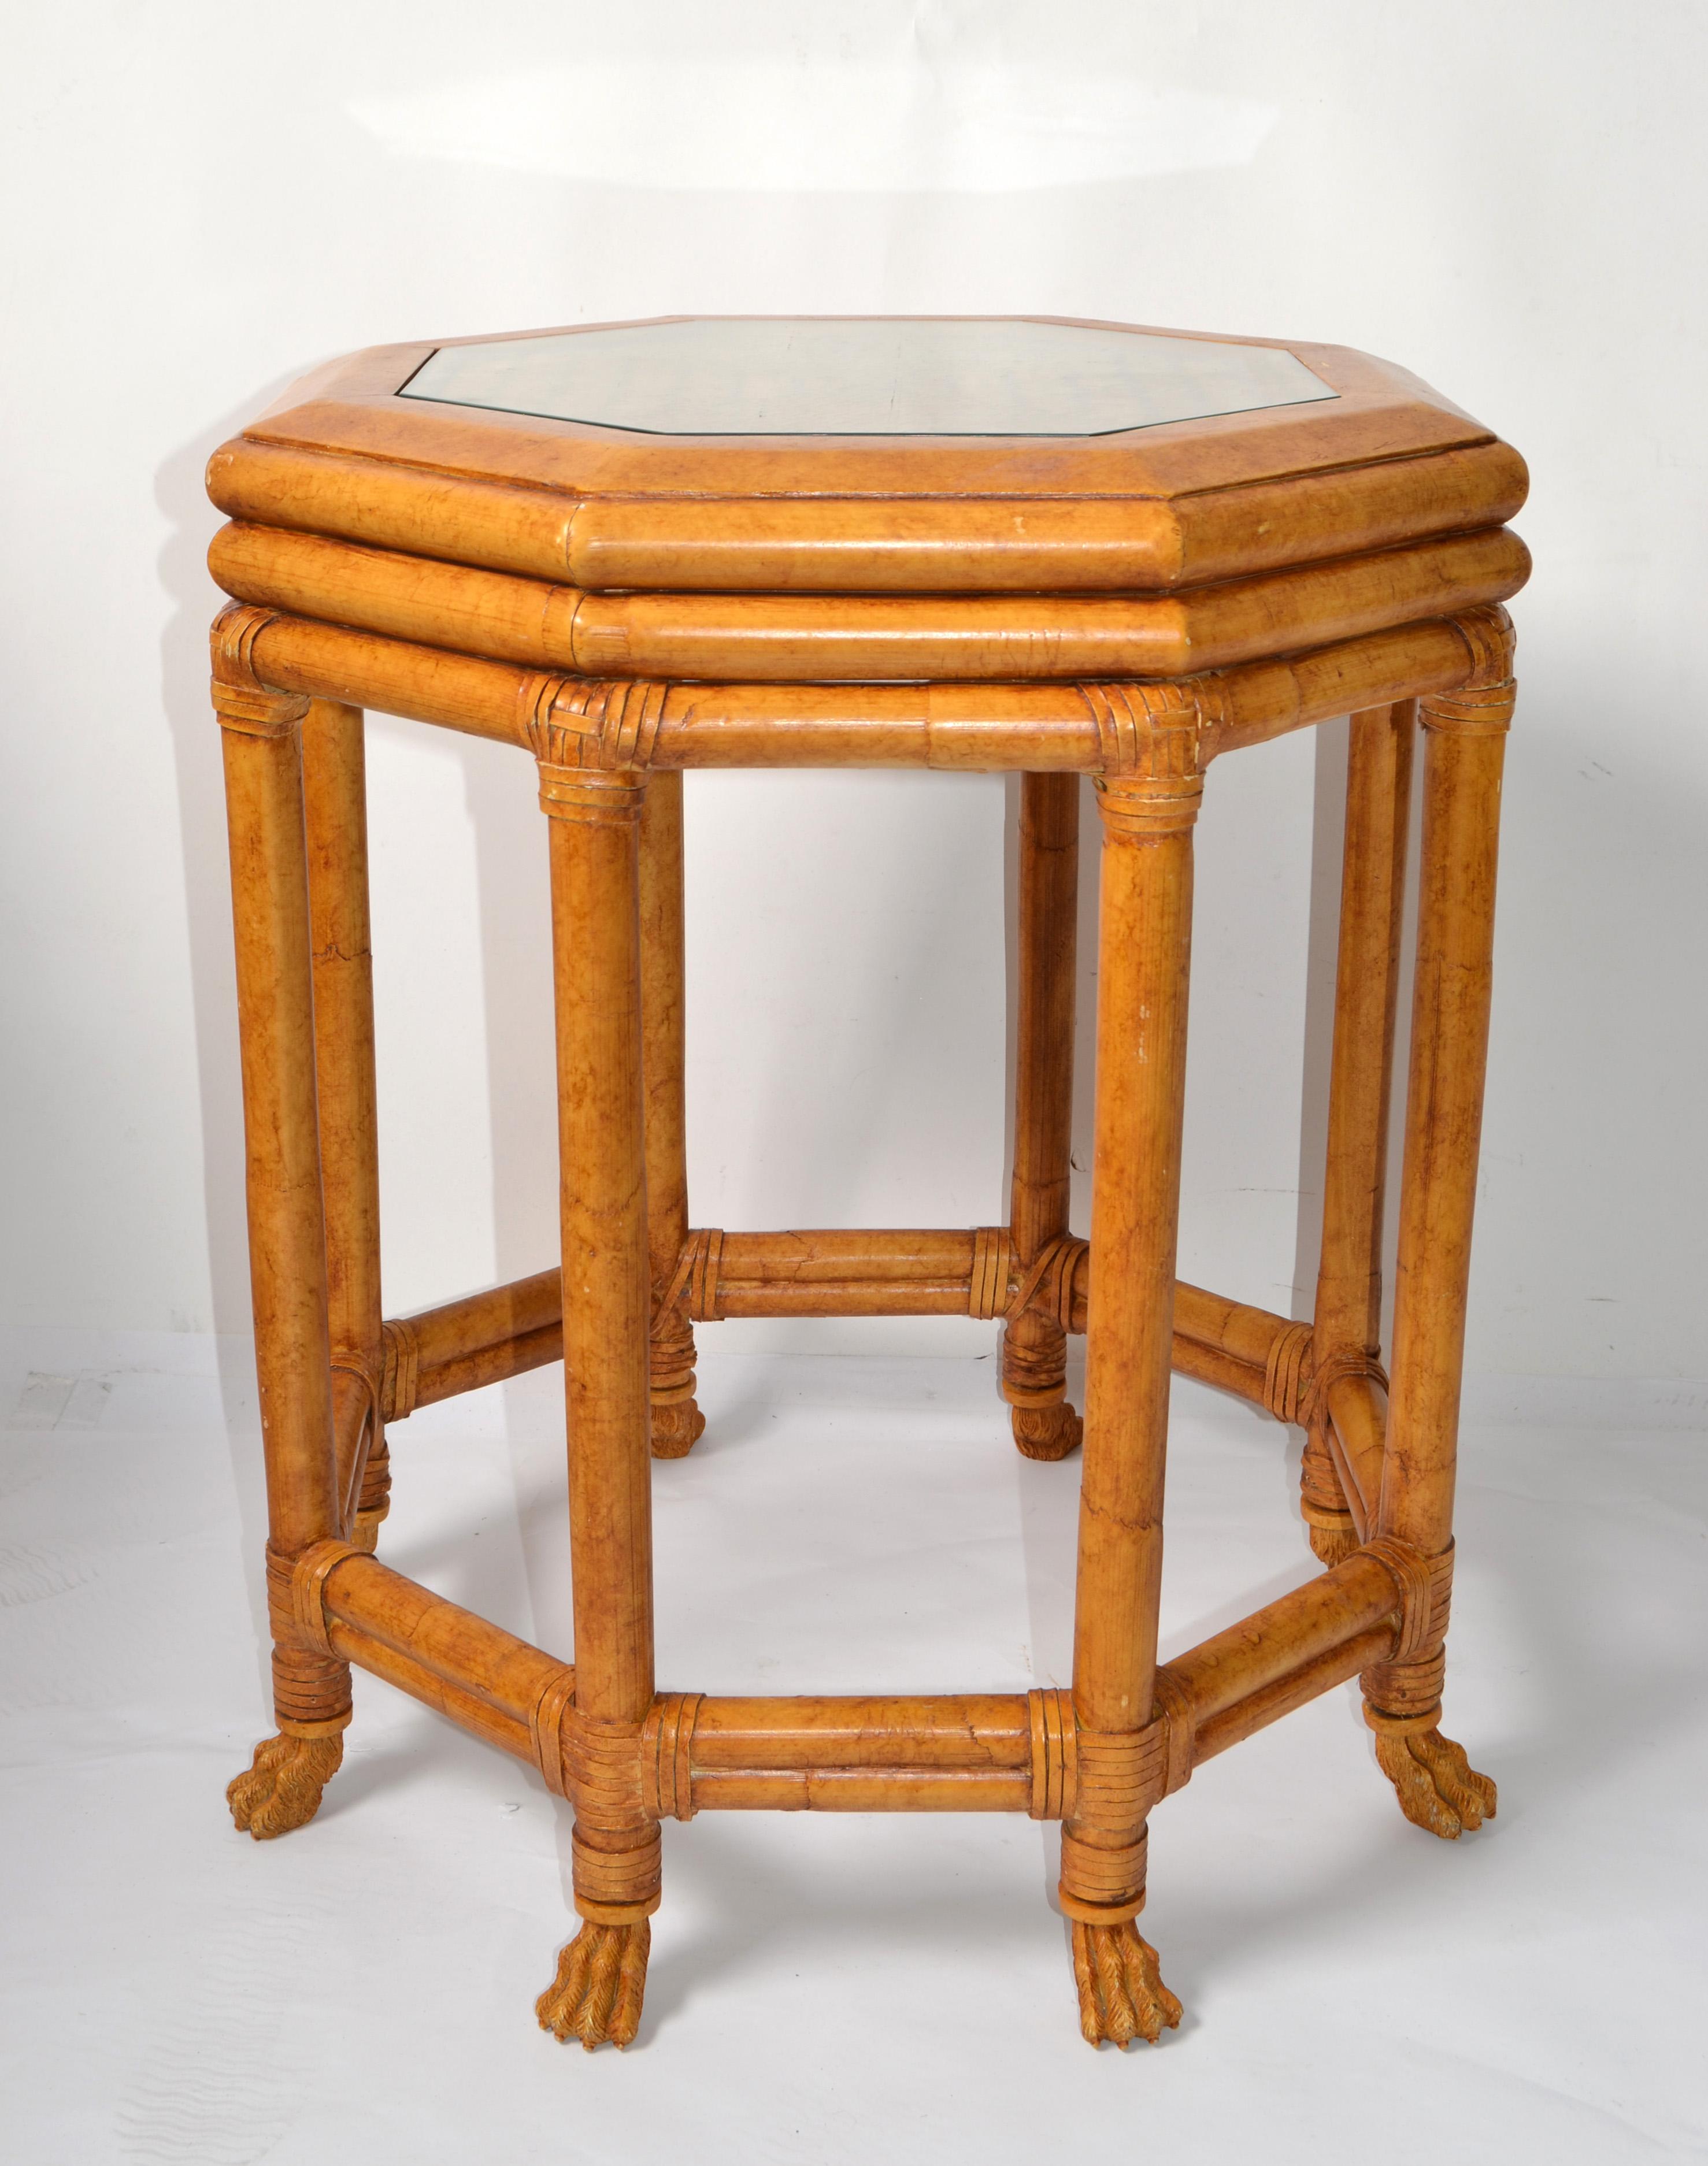 McGuire Style Octagonal Bamboo Burl Veneer Leather Bindings Glass Accent Table  For Sale 7